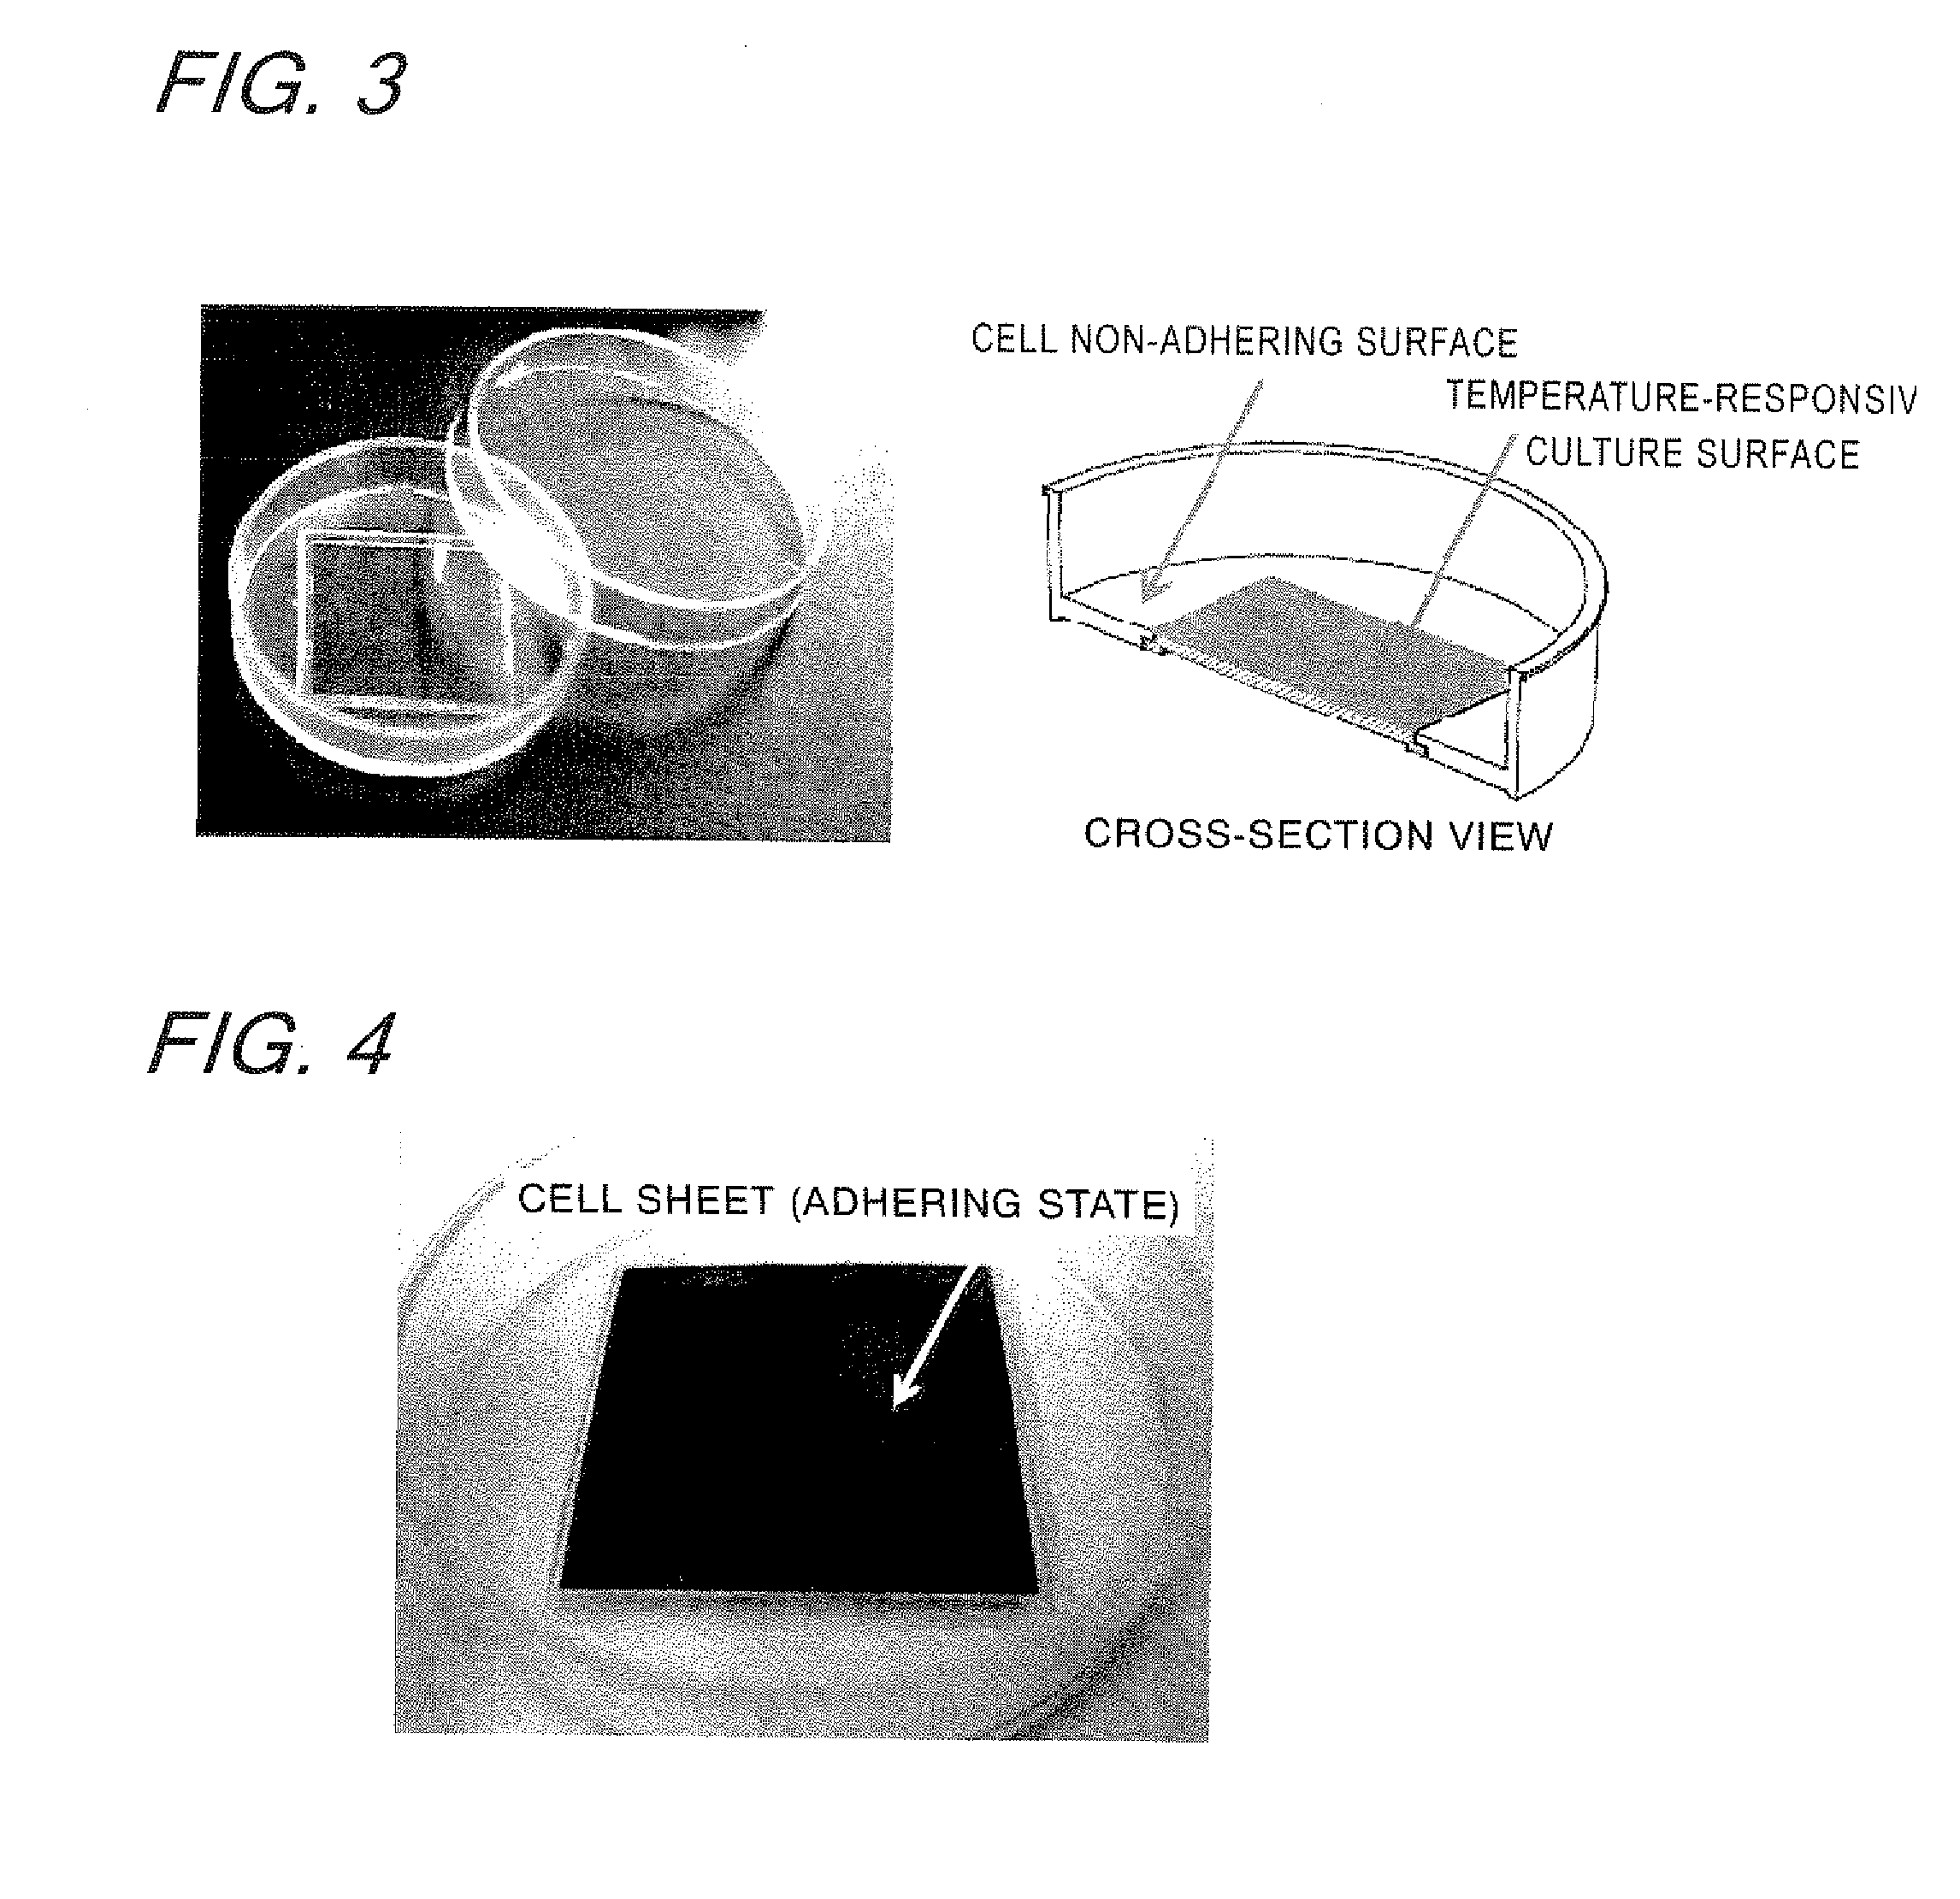 Temperature-responsive cell culture substrate and method for producing the same